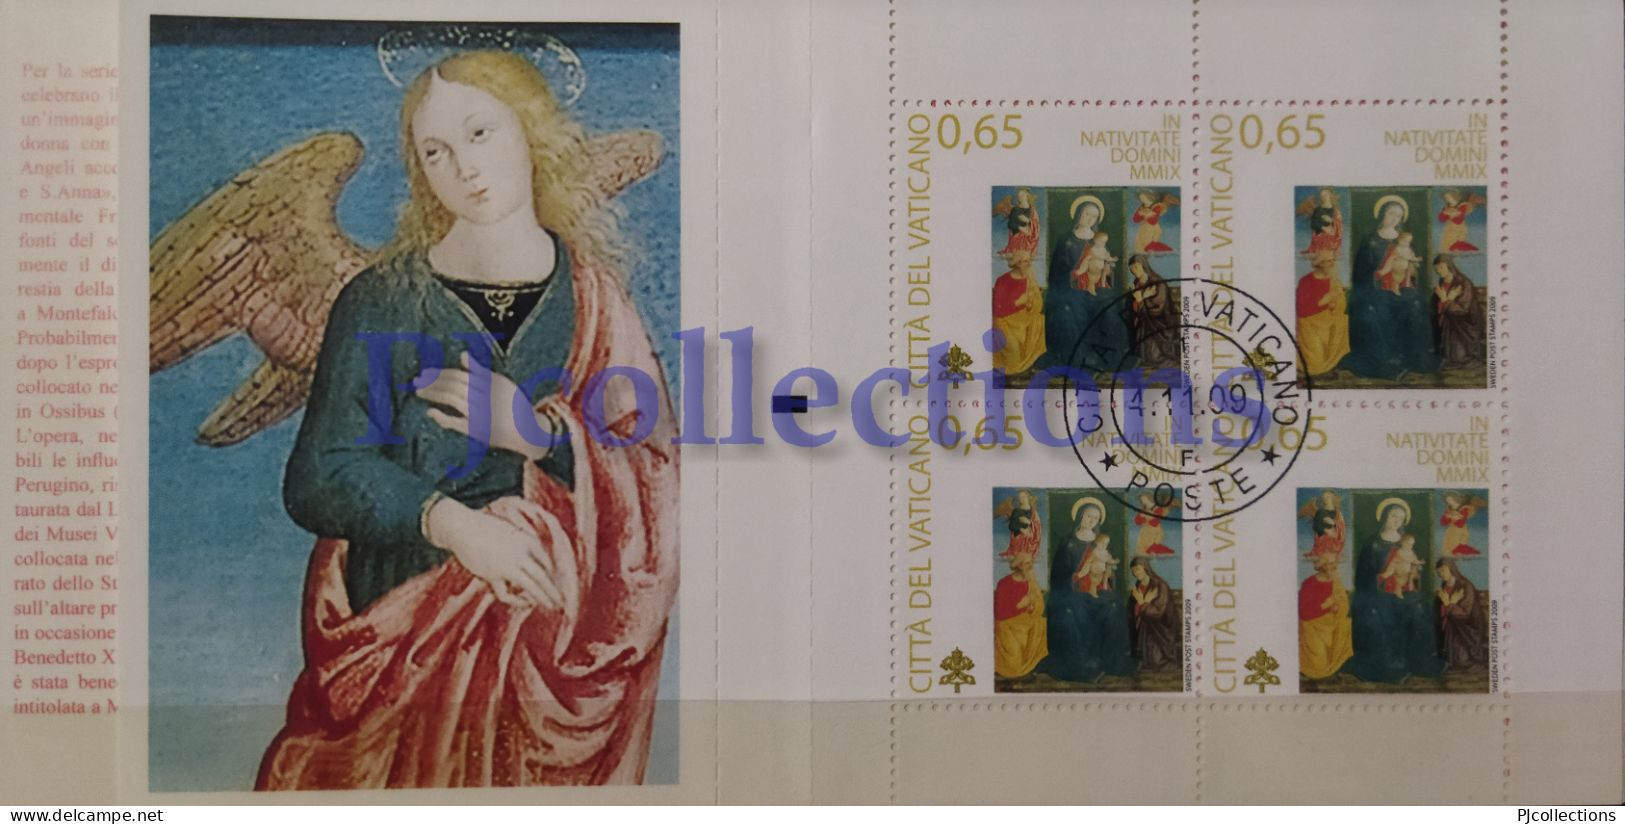 3763- VATICANO- VATICAN CITY 2009 NATALE - CHRISTMAS FULL BOOKLET 4 STAMPS C/ANNULLO 1° GIORNO - USED - Oblitérés